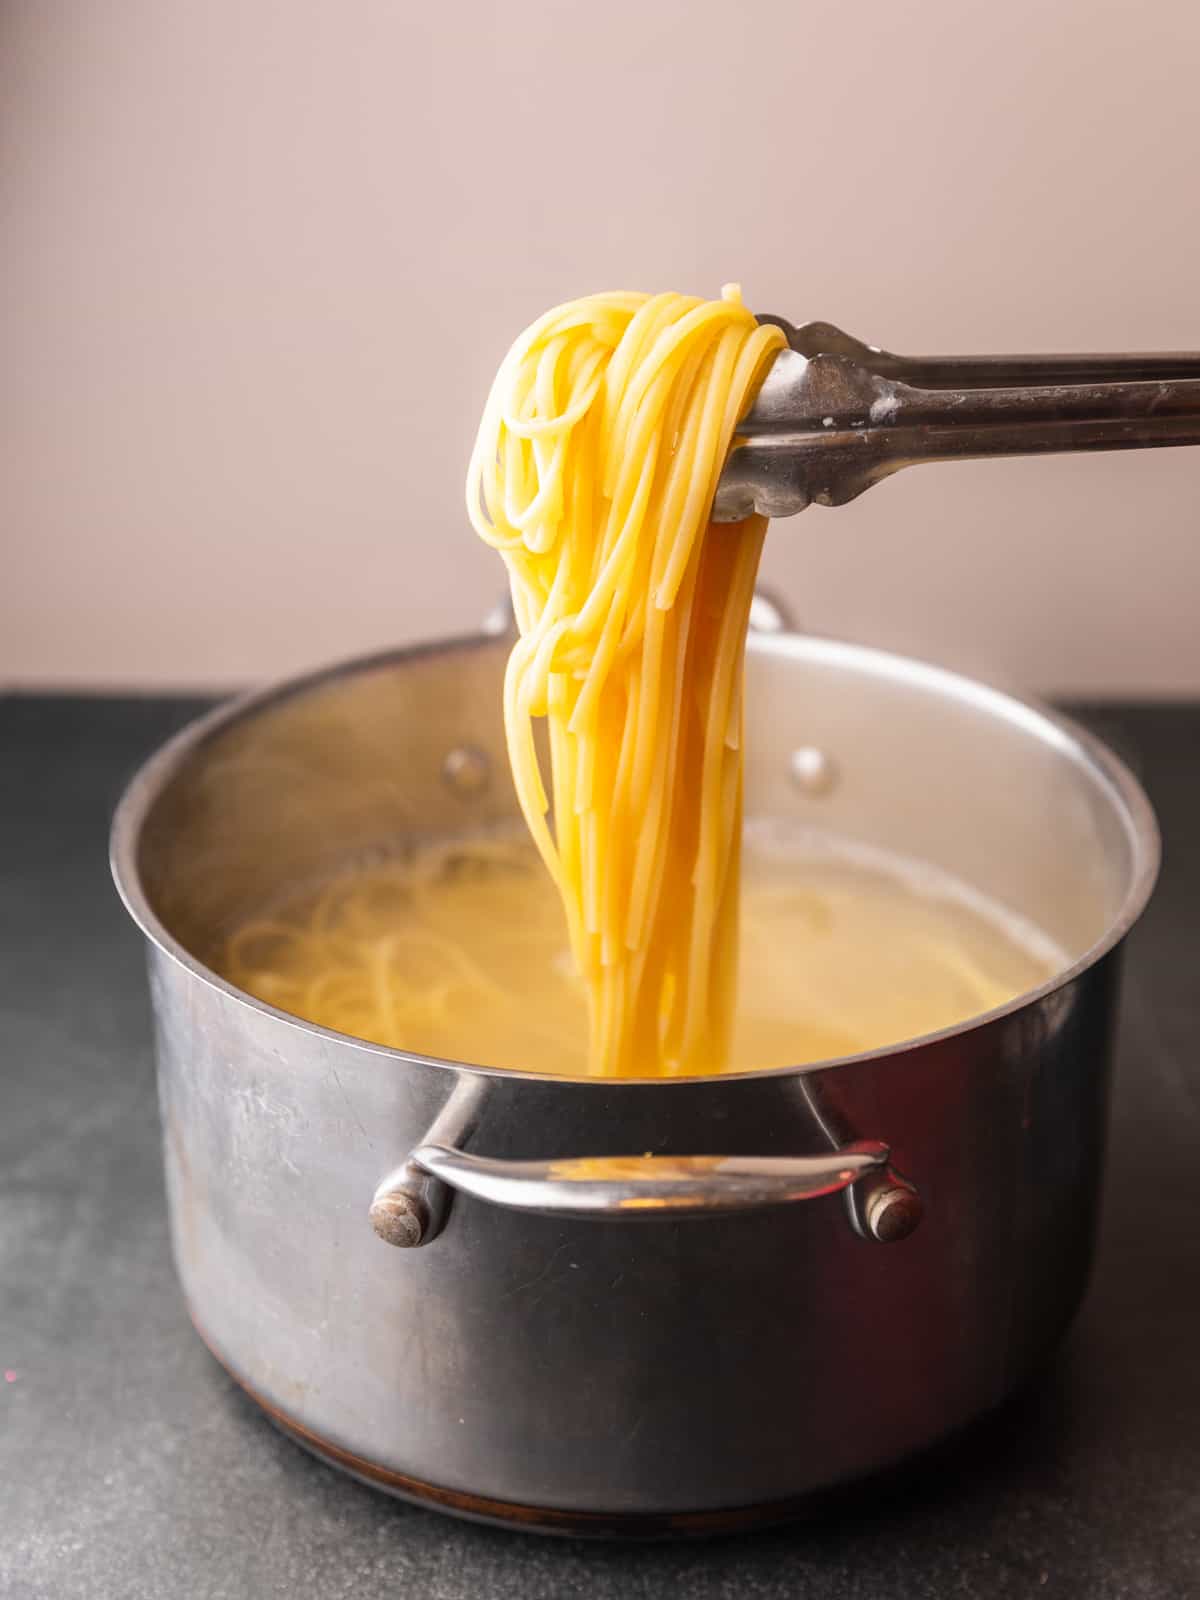 tongs holding a bunch of cooked linguine pasta over a pot of pasta cooking in water.